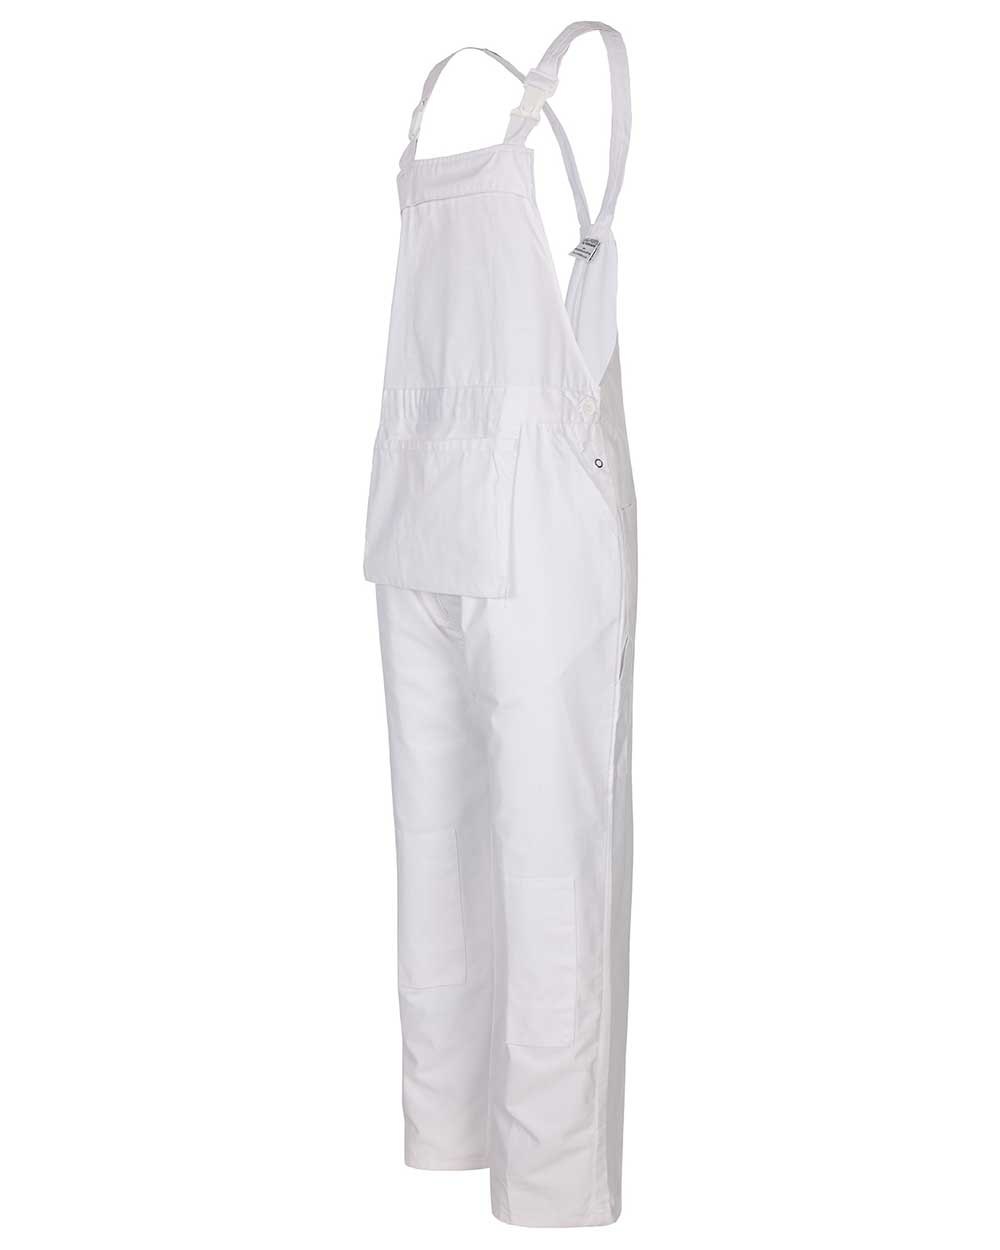 White coloured Fort Bib &amp; Brace Overall Polycotton on white background 